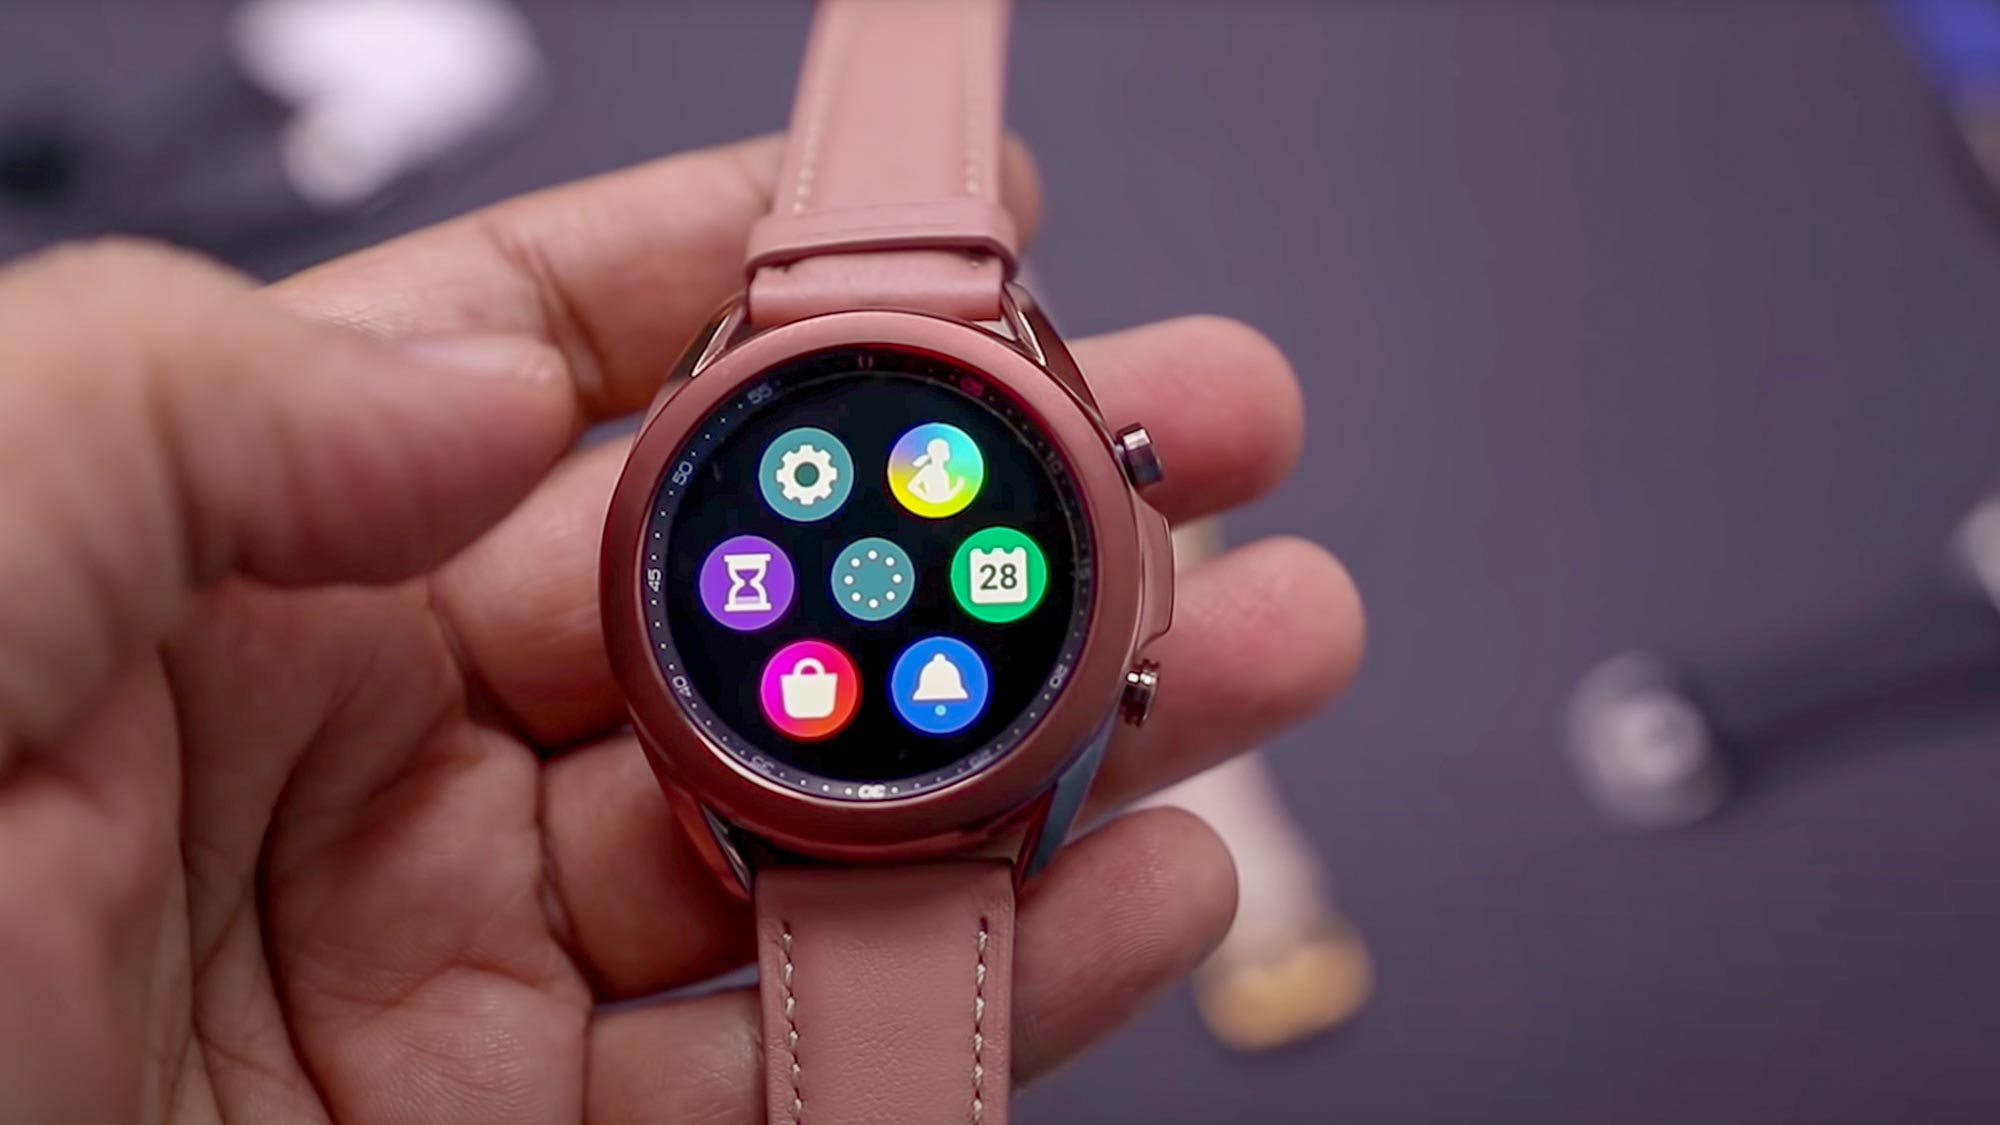 Best smartwatches for Android in 2021: Samsung Galaxy Watch 3